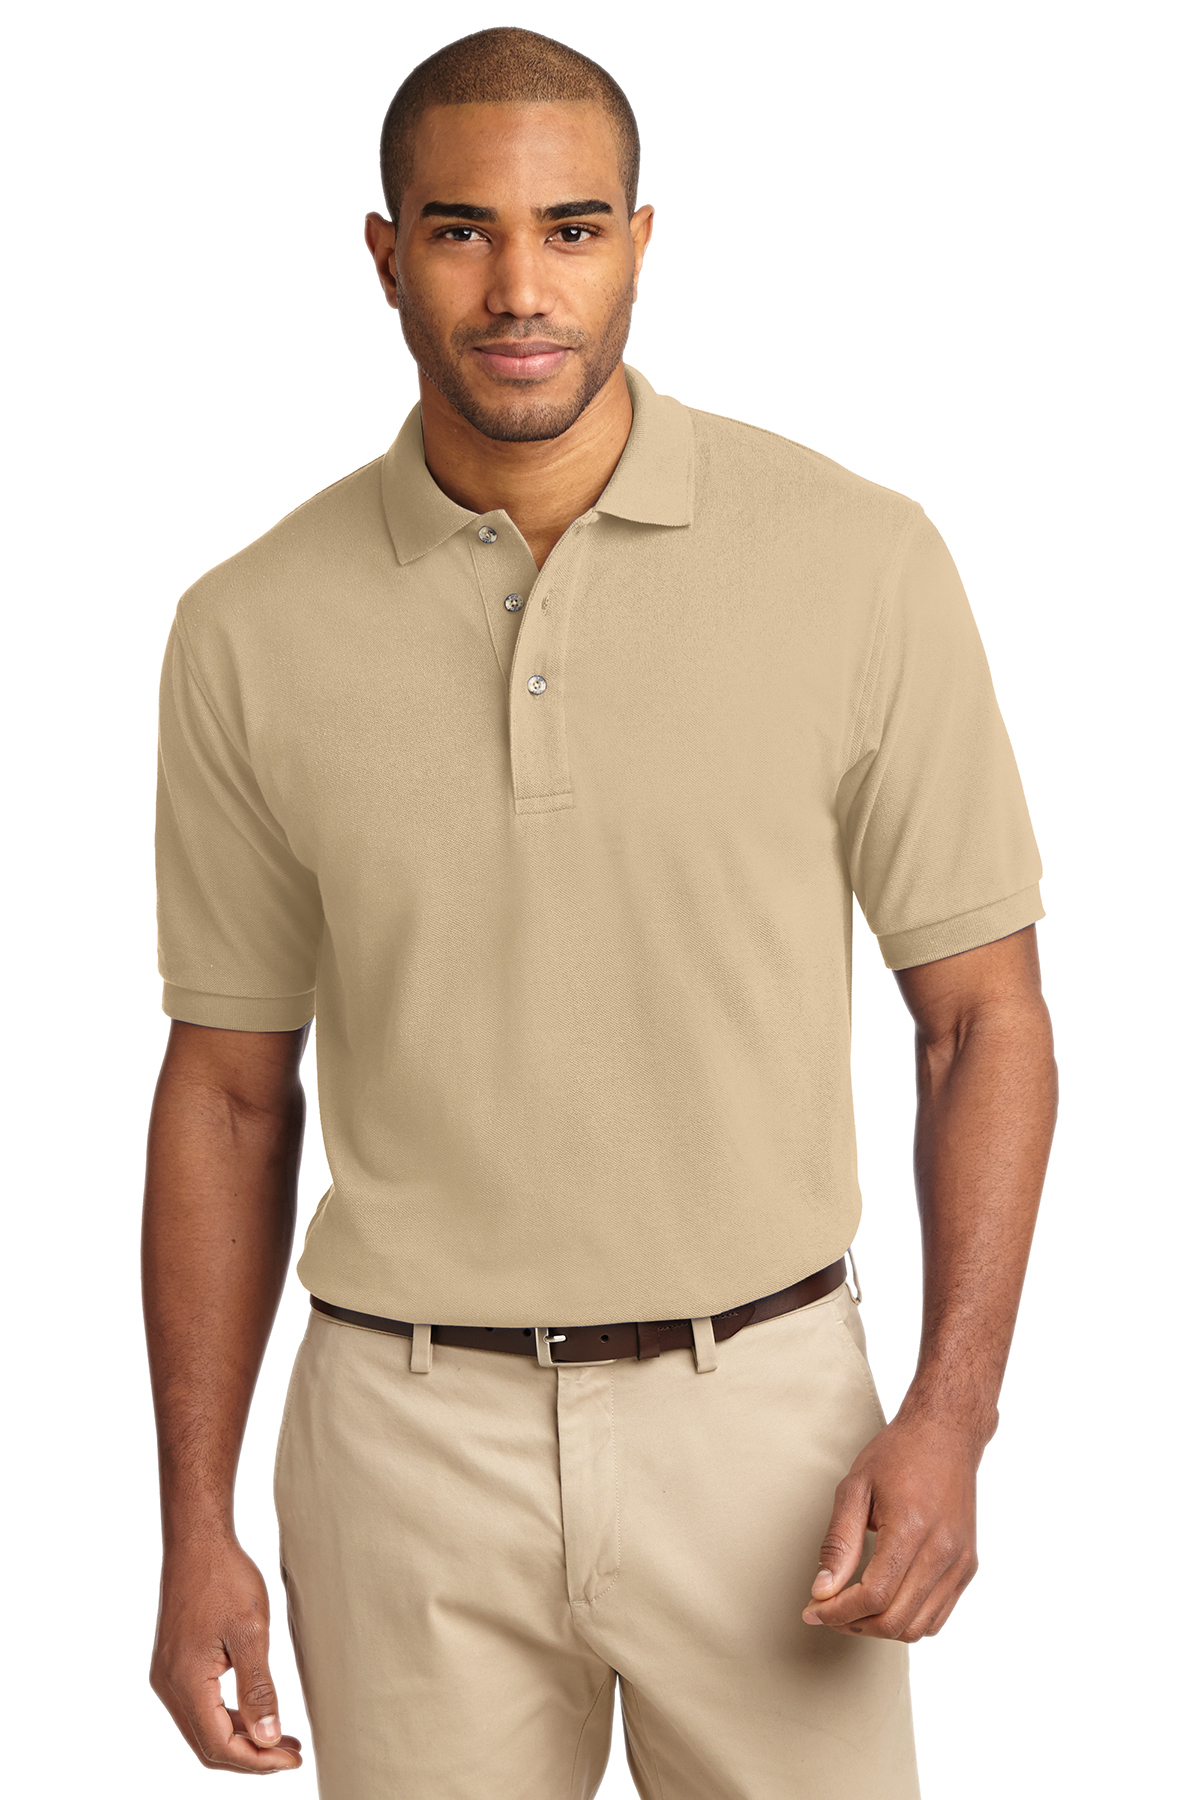 K420P Mens Port Authority Pique Knit Polo with Pocket 